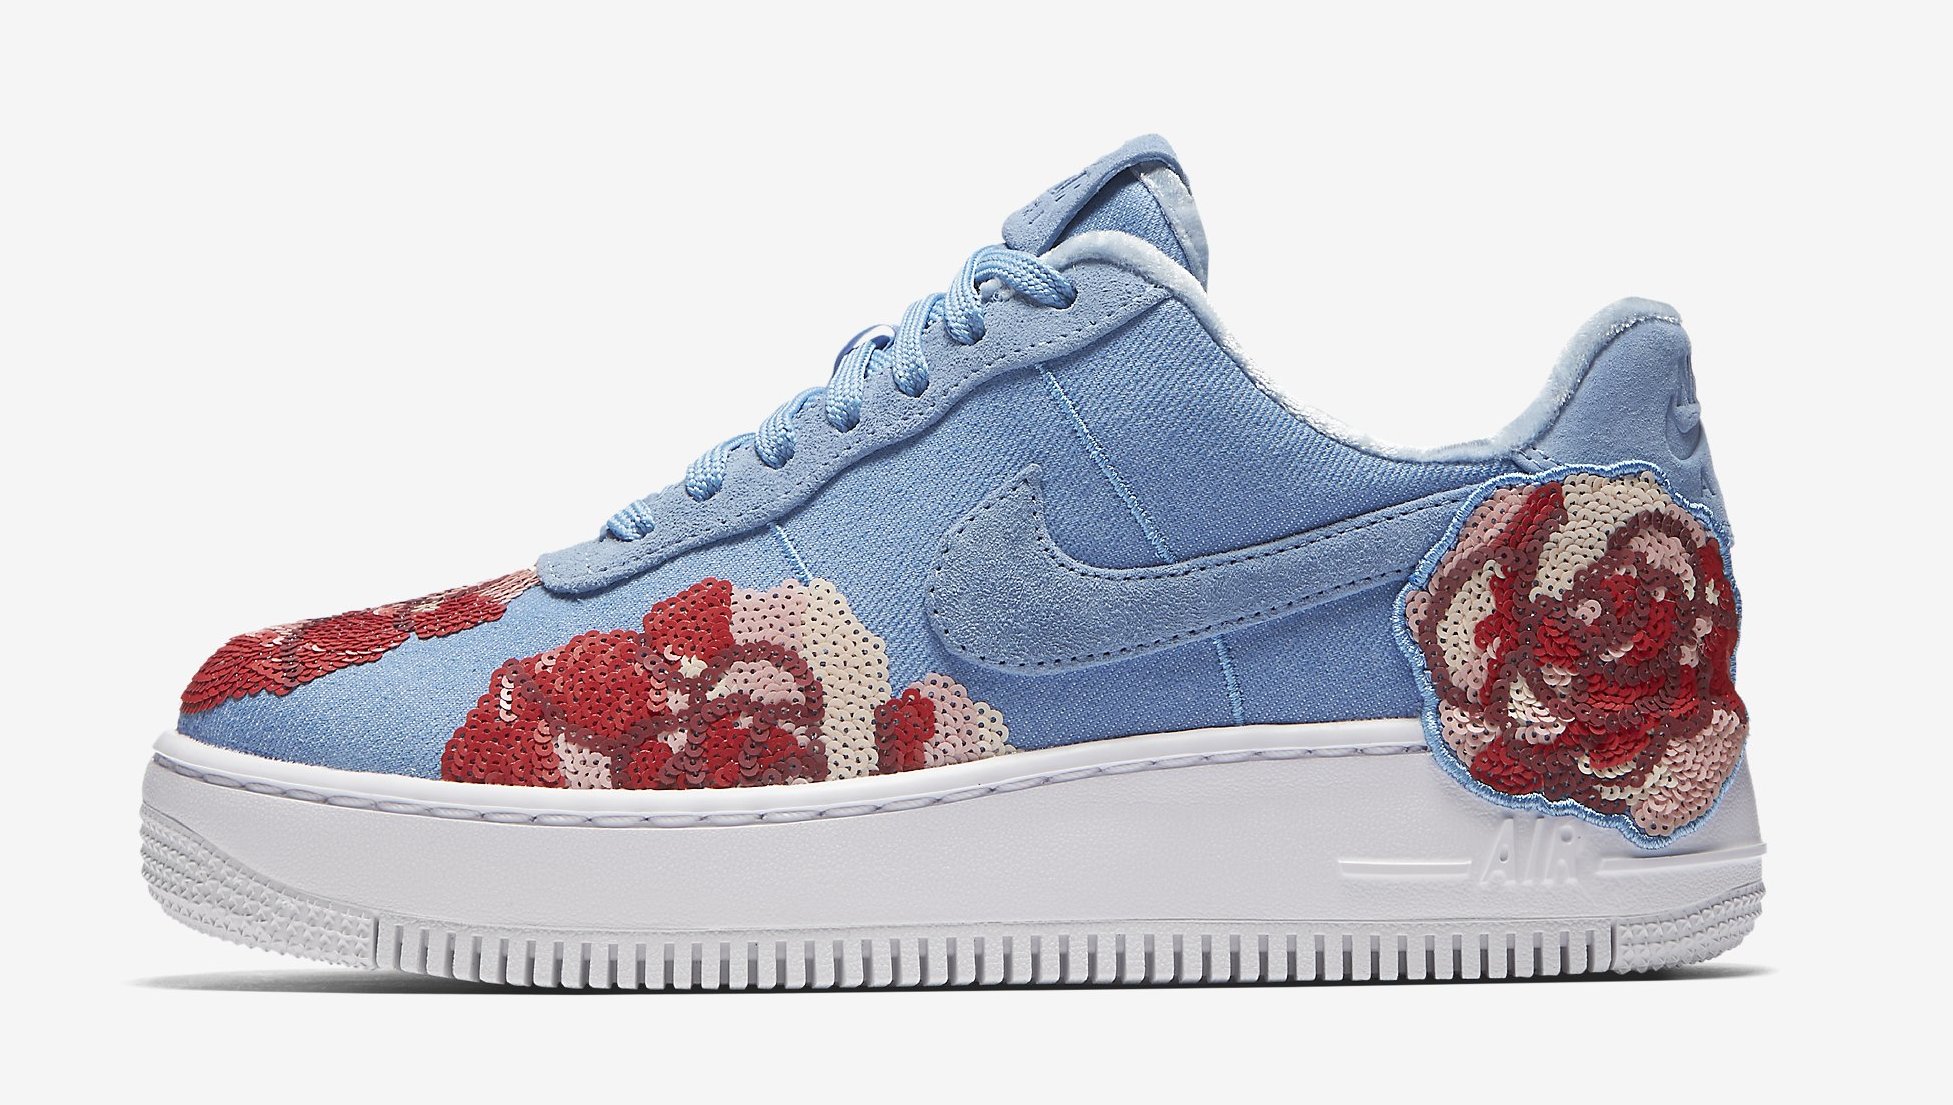 Nike Air Force 1 Low Floral Sequin Pack 898421 402 (Lateral)